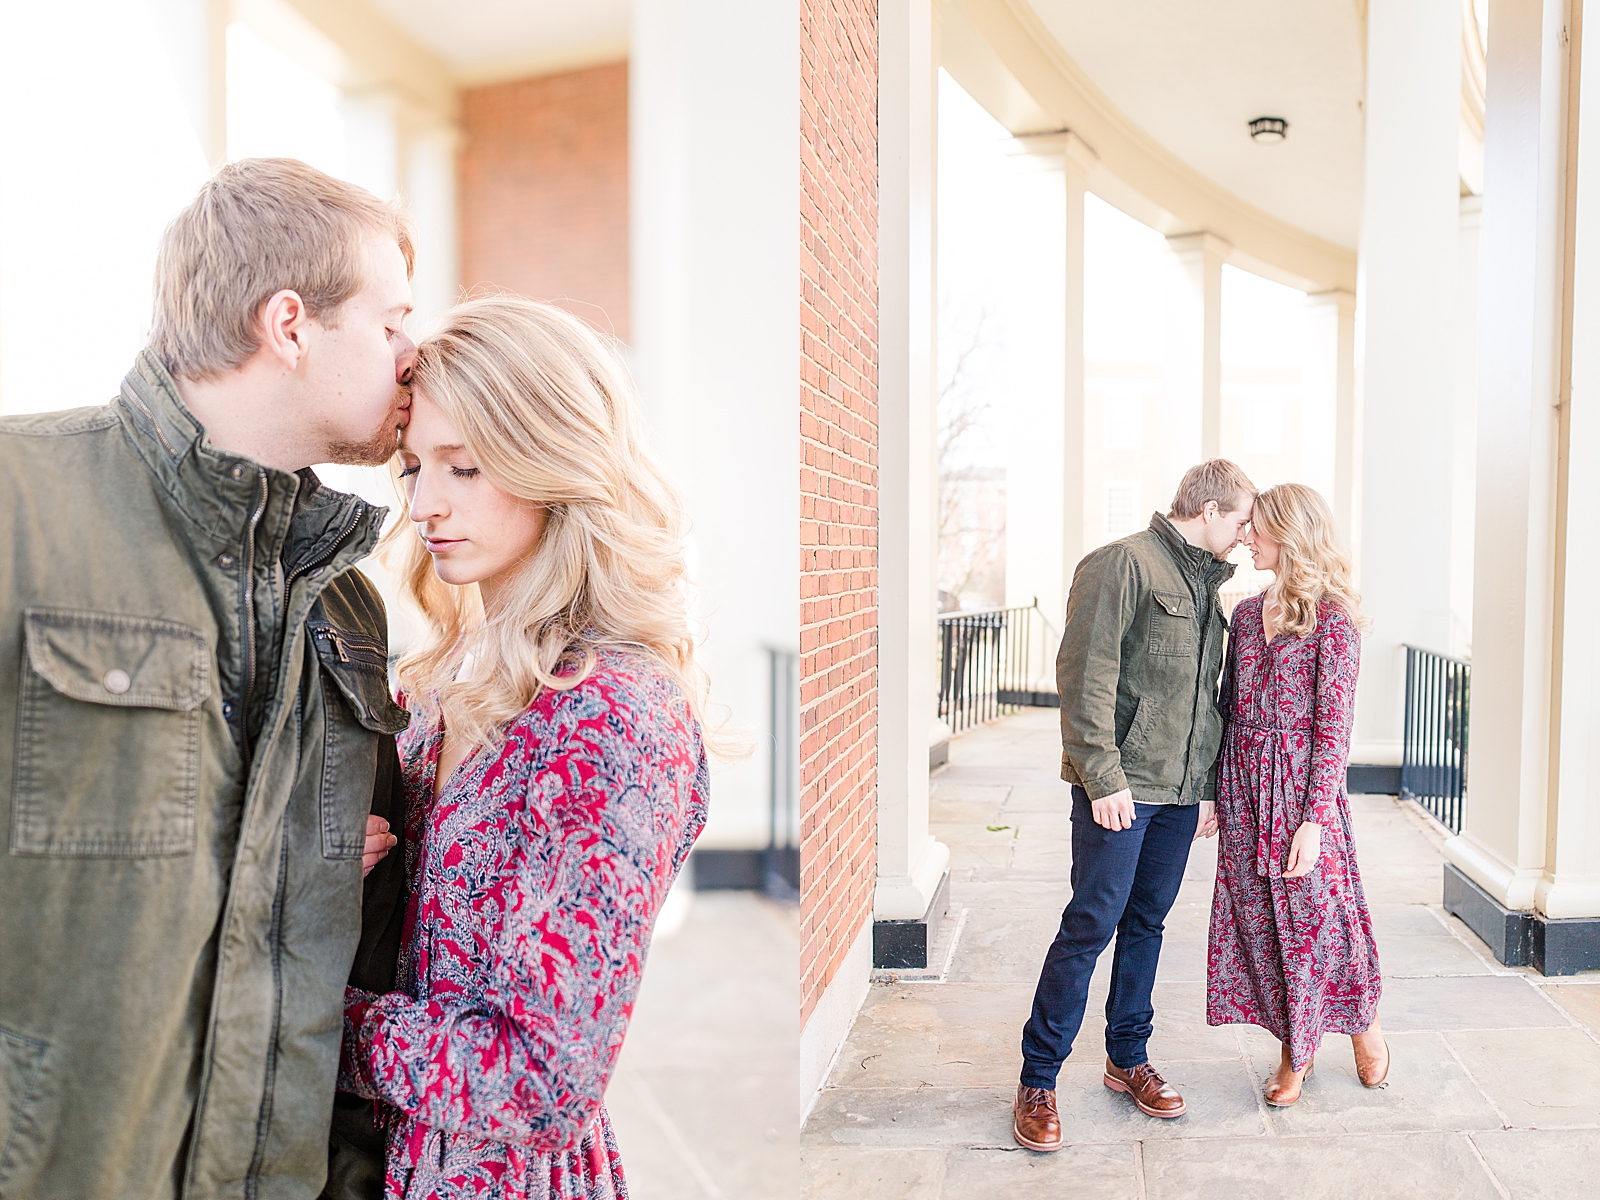 Winston-Salem Engagement Session Chris kissing Katie on the head and couple nose to nose Photos